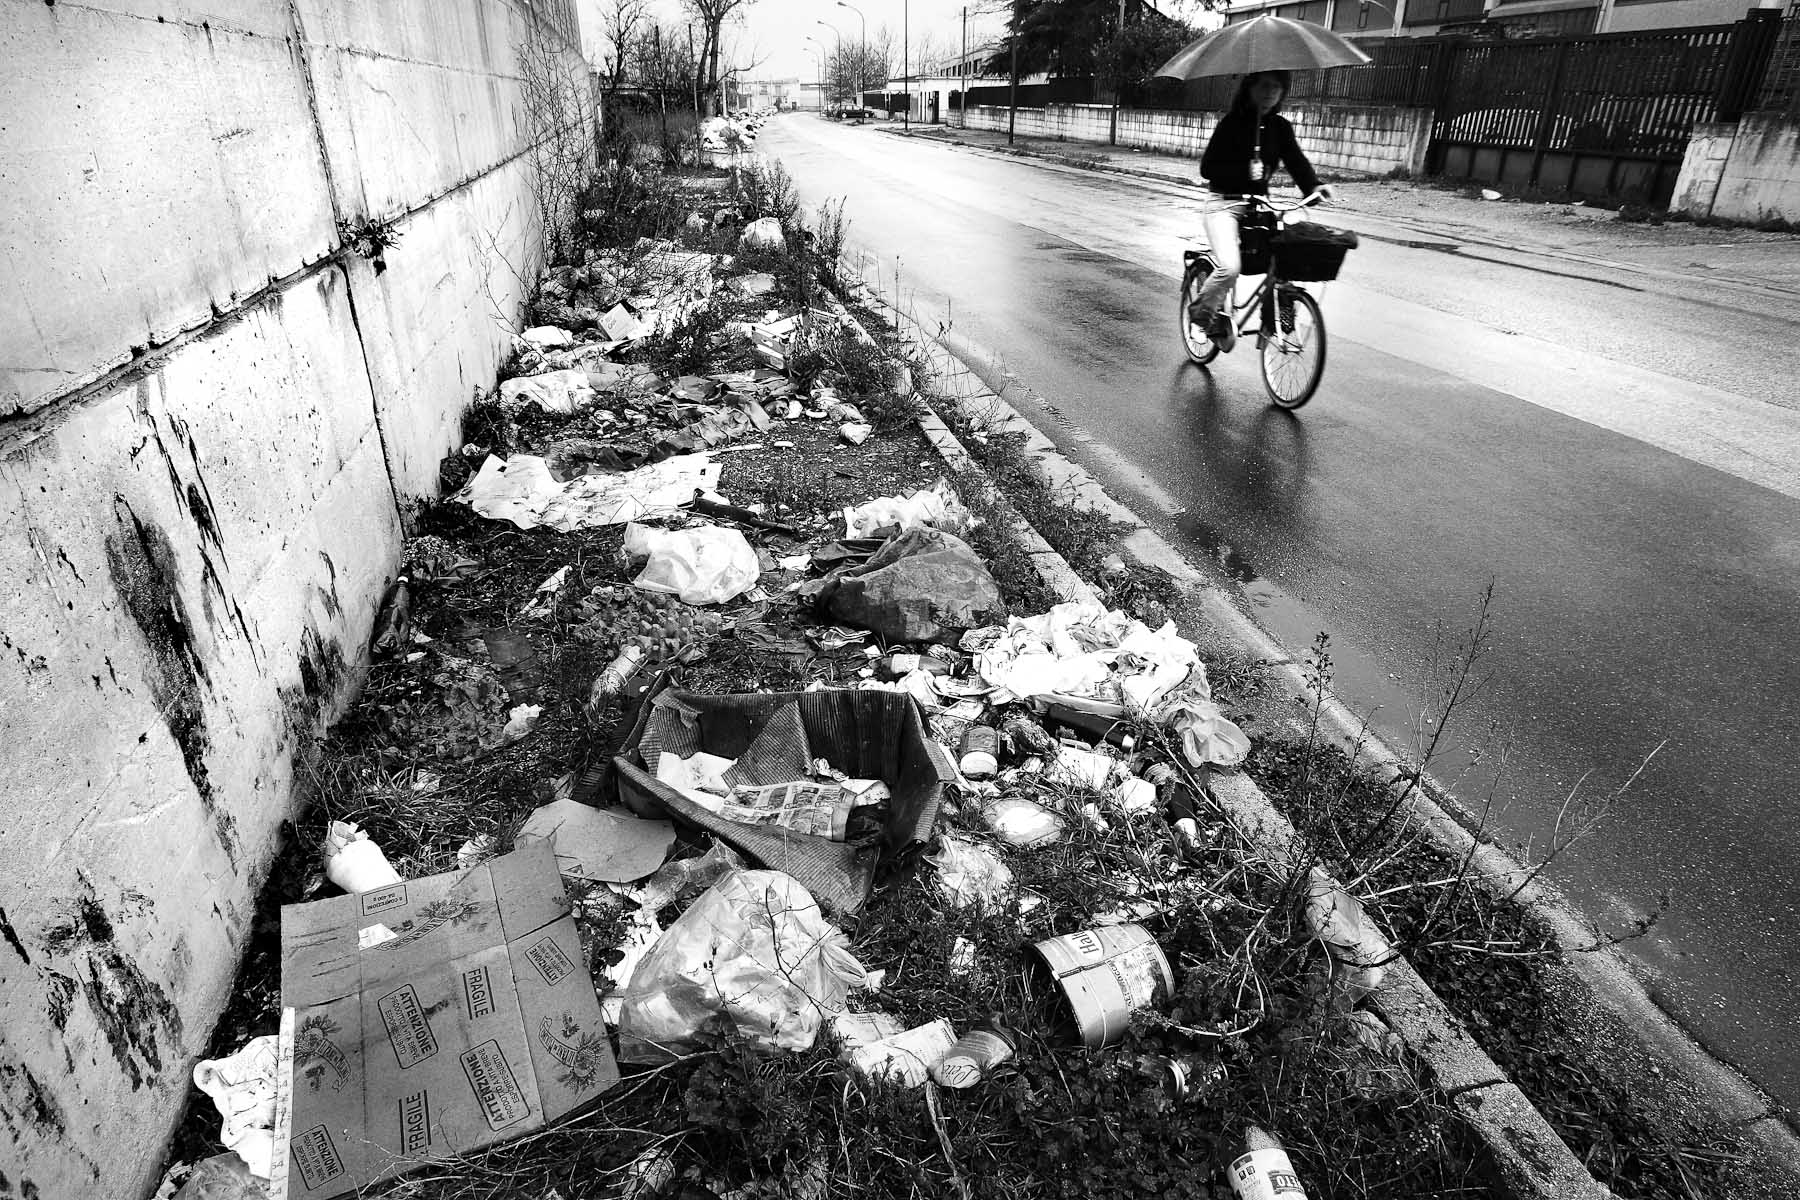 Every stretch of grass along a street in the industrial part of Caserta on the outskirts of Naples is littered with garbage on February 21, 2008.